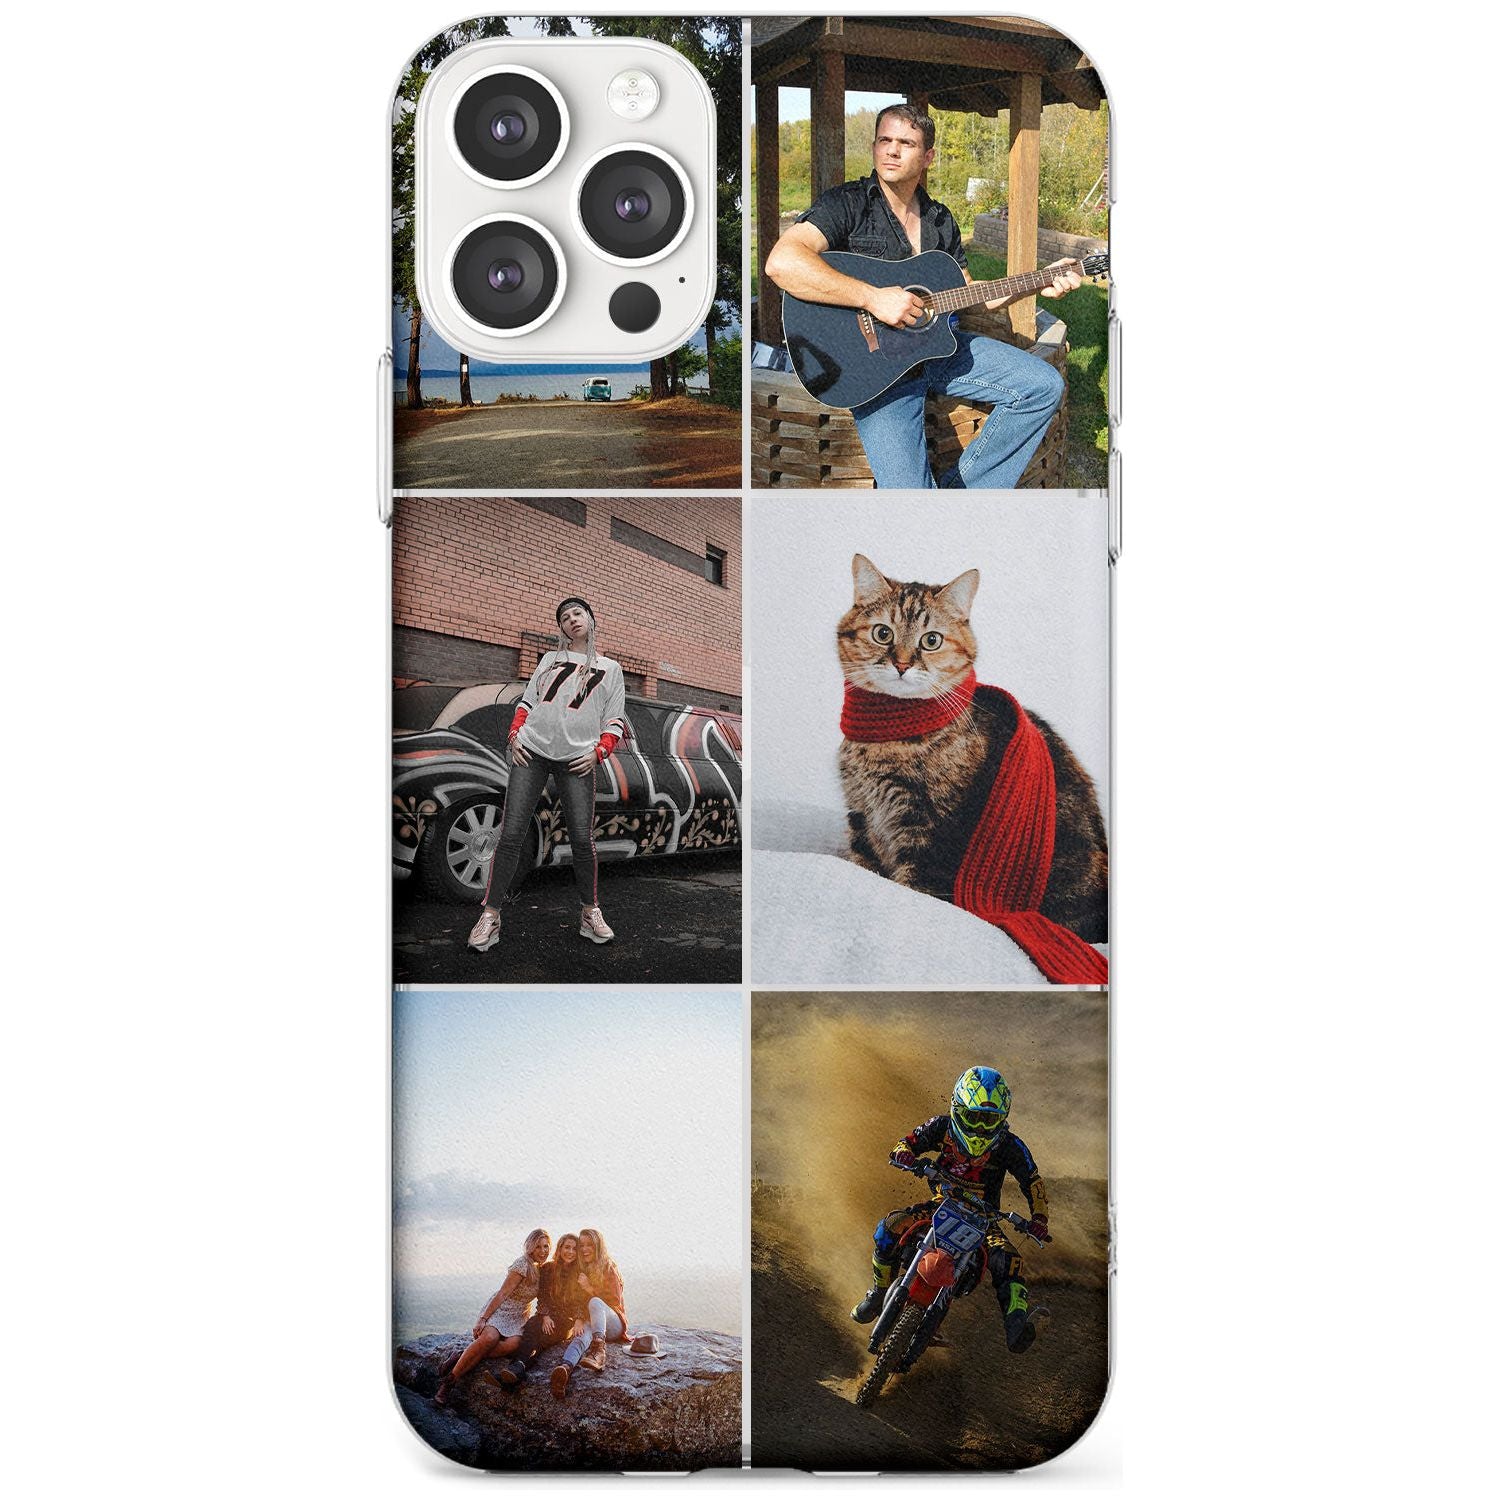 6 Photo Grid  Black Impact Phone Case for iPhone 11 Pro Max